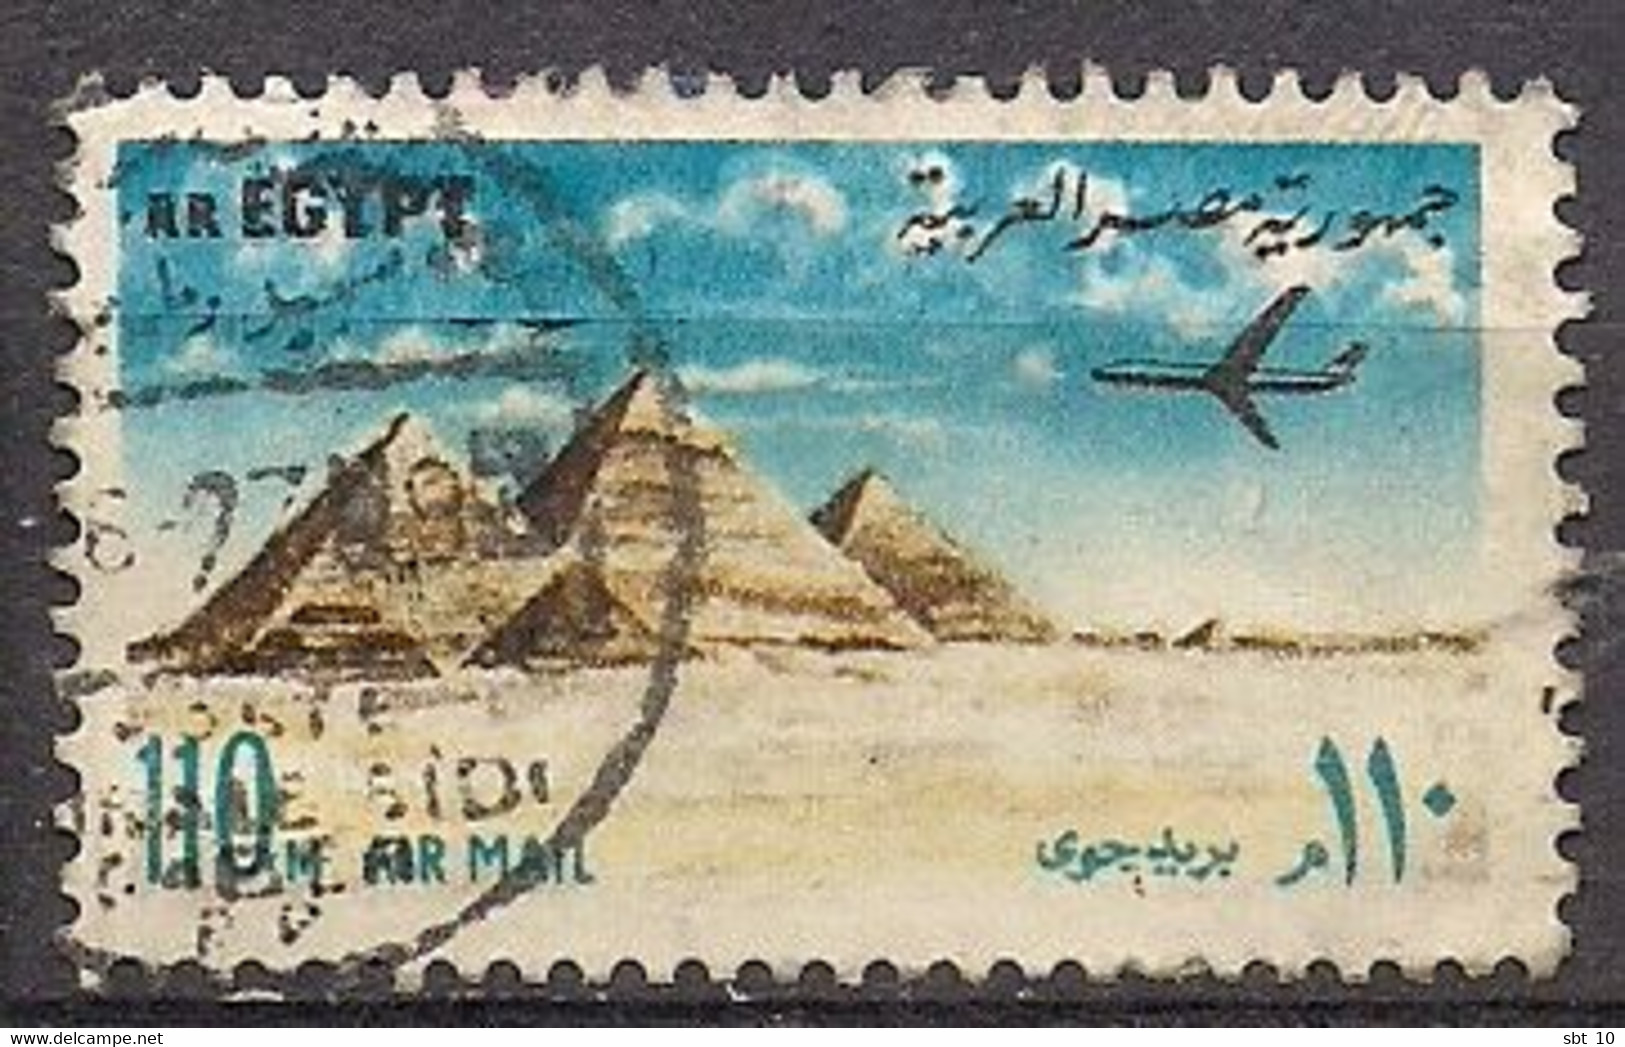 Egypt 1972 - Pyramids At Giza Scott#C148 - Used - Used Stamps